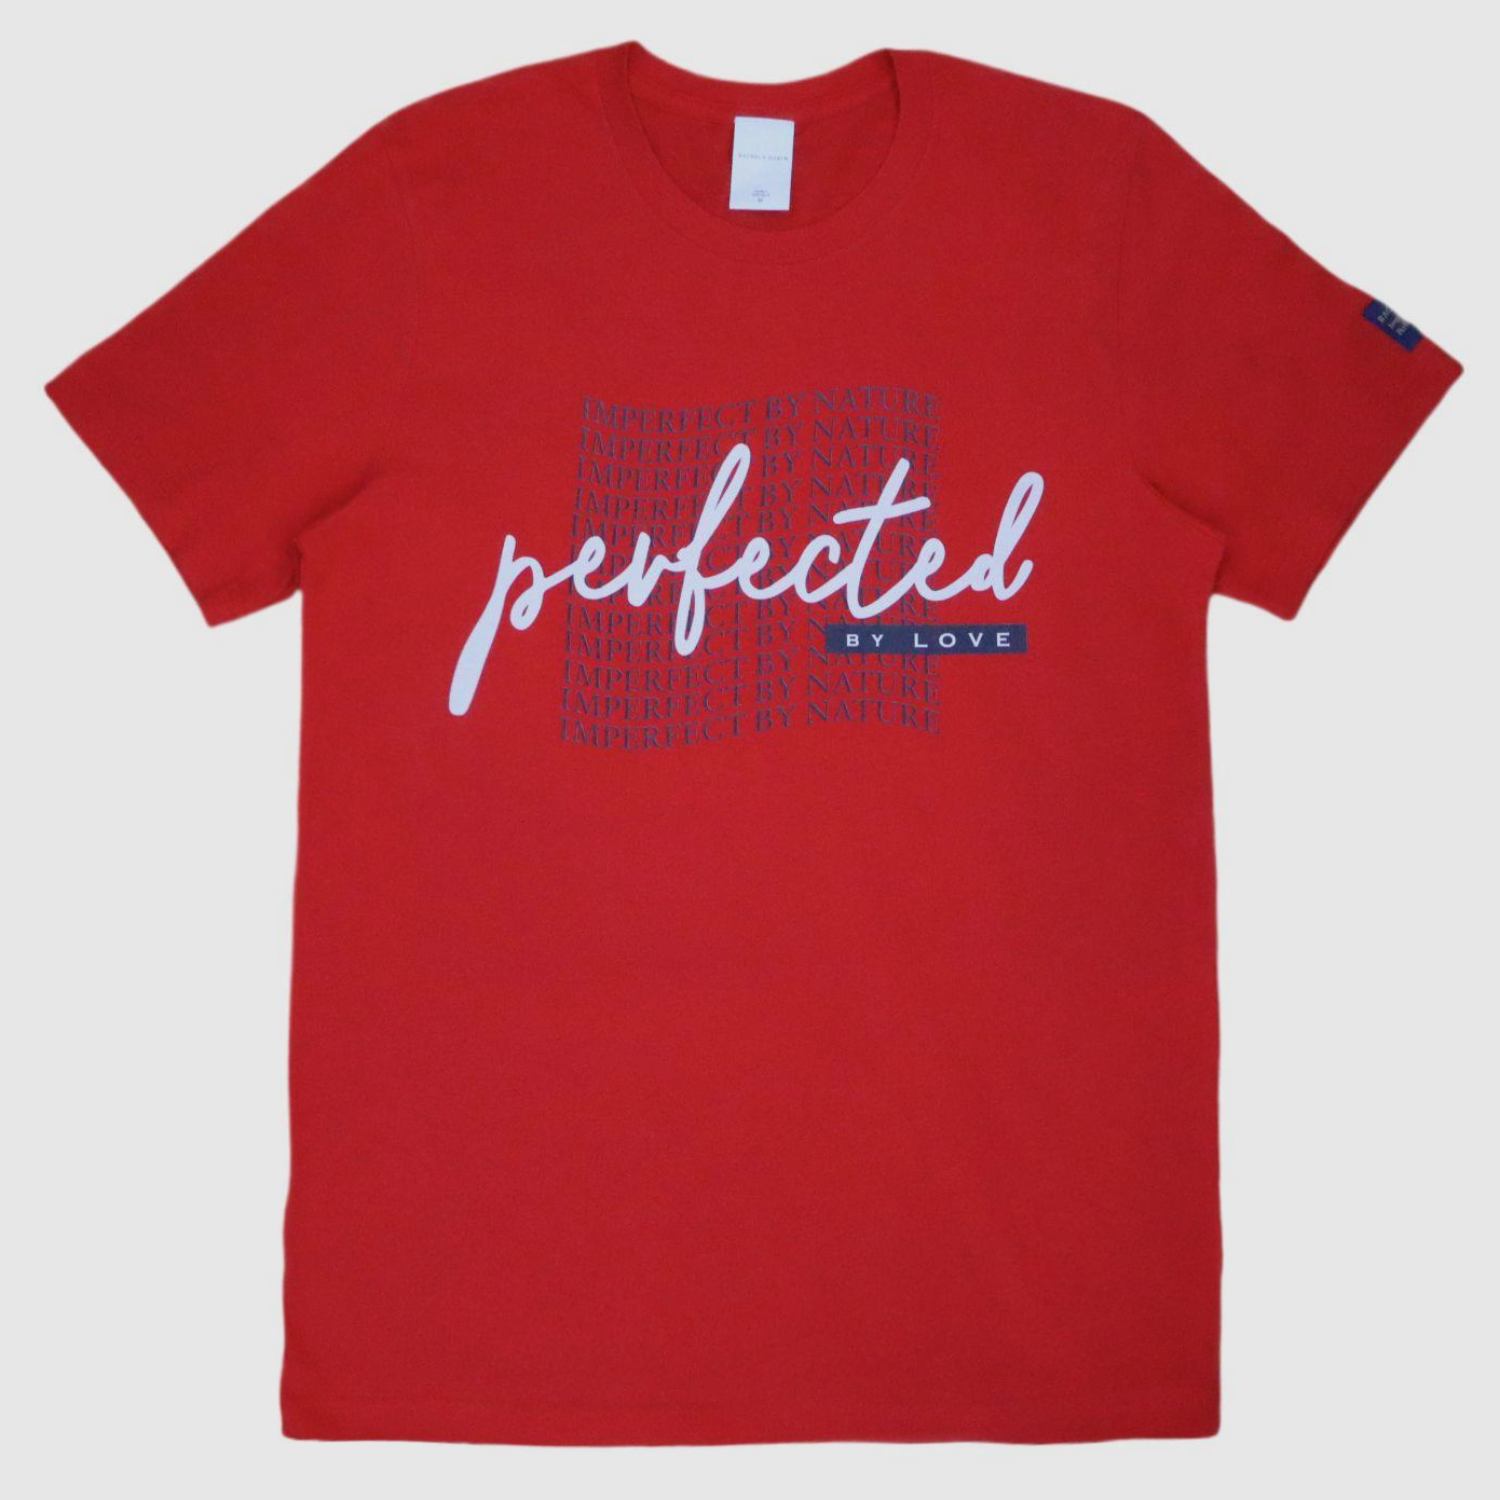 Wave Short Sleeve Perfected by Love Red Tee